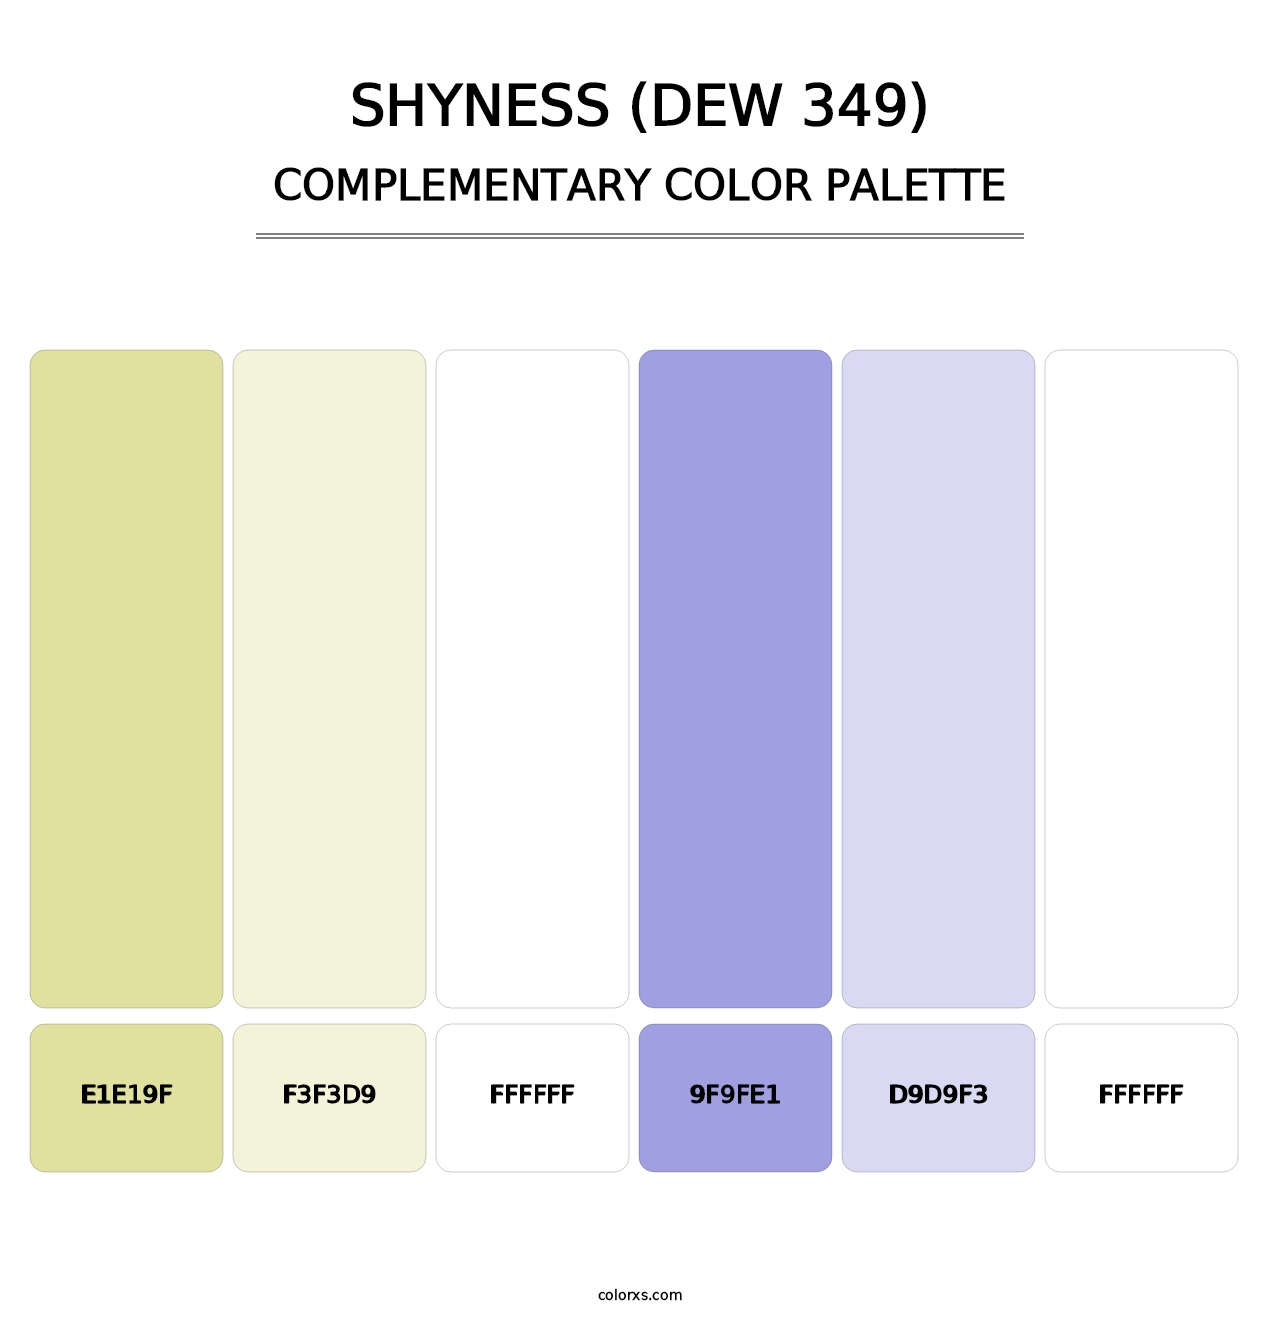 Shyness (DEW 349) - Complementary Color Palette